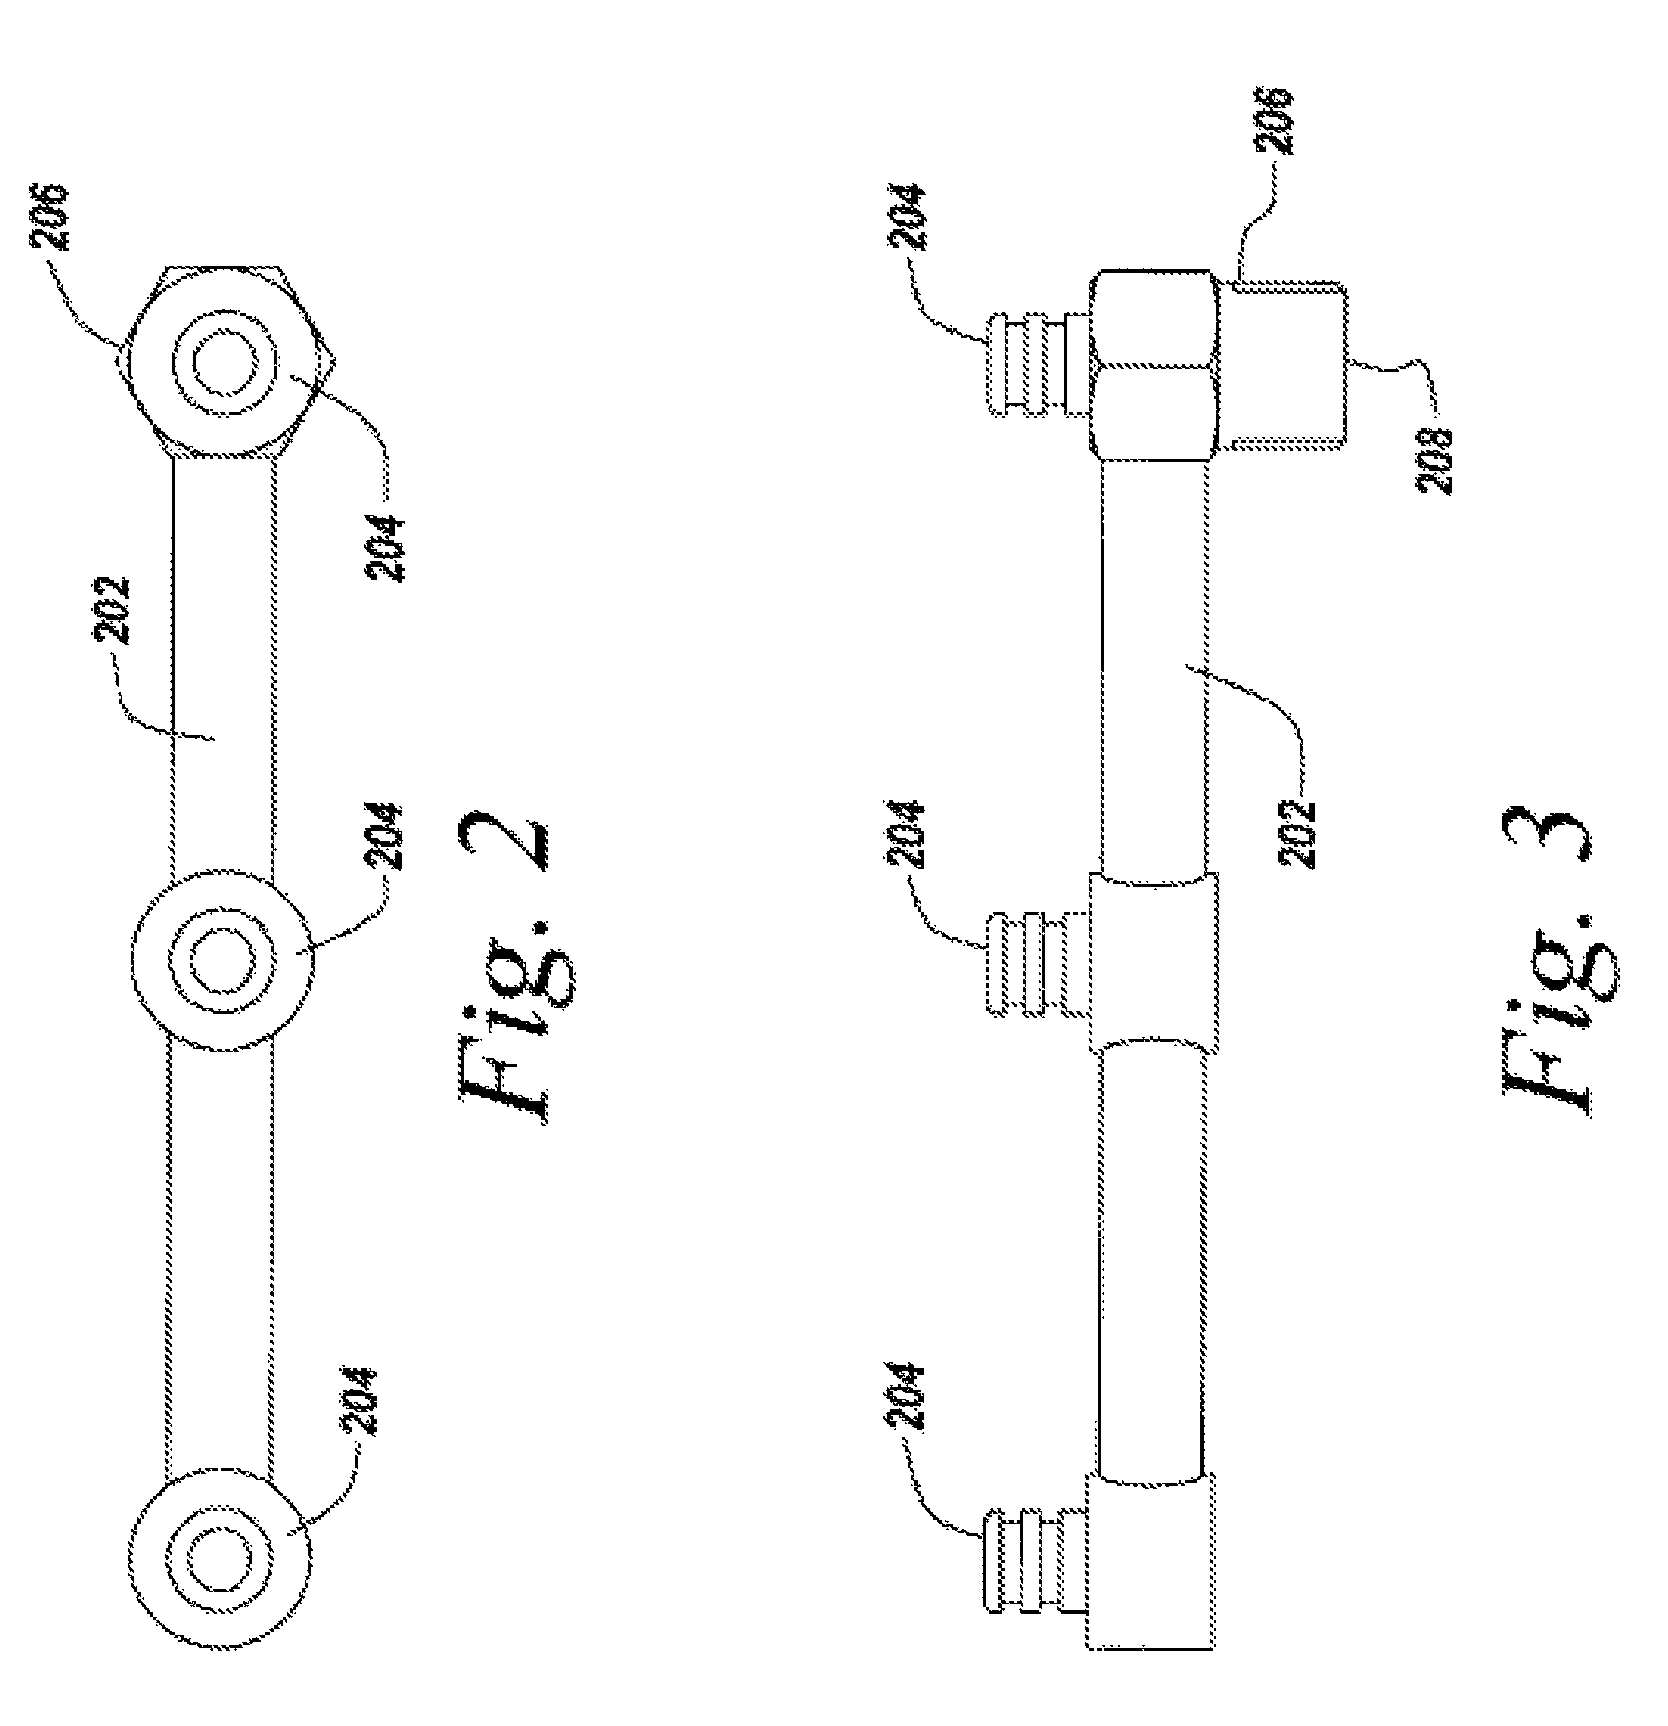 Heating element assembly for electric tankless liquid heater